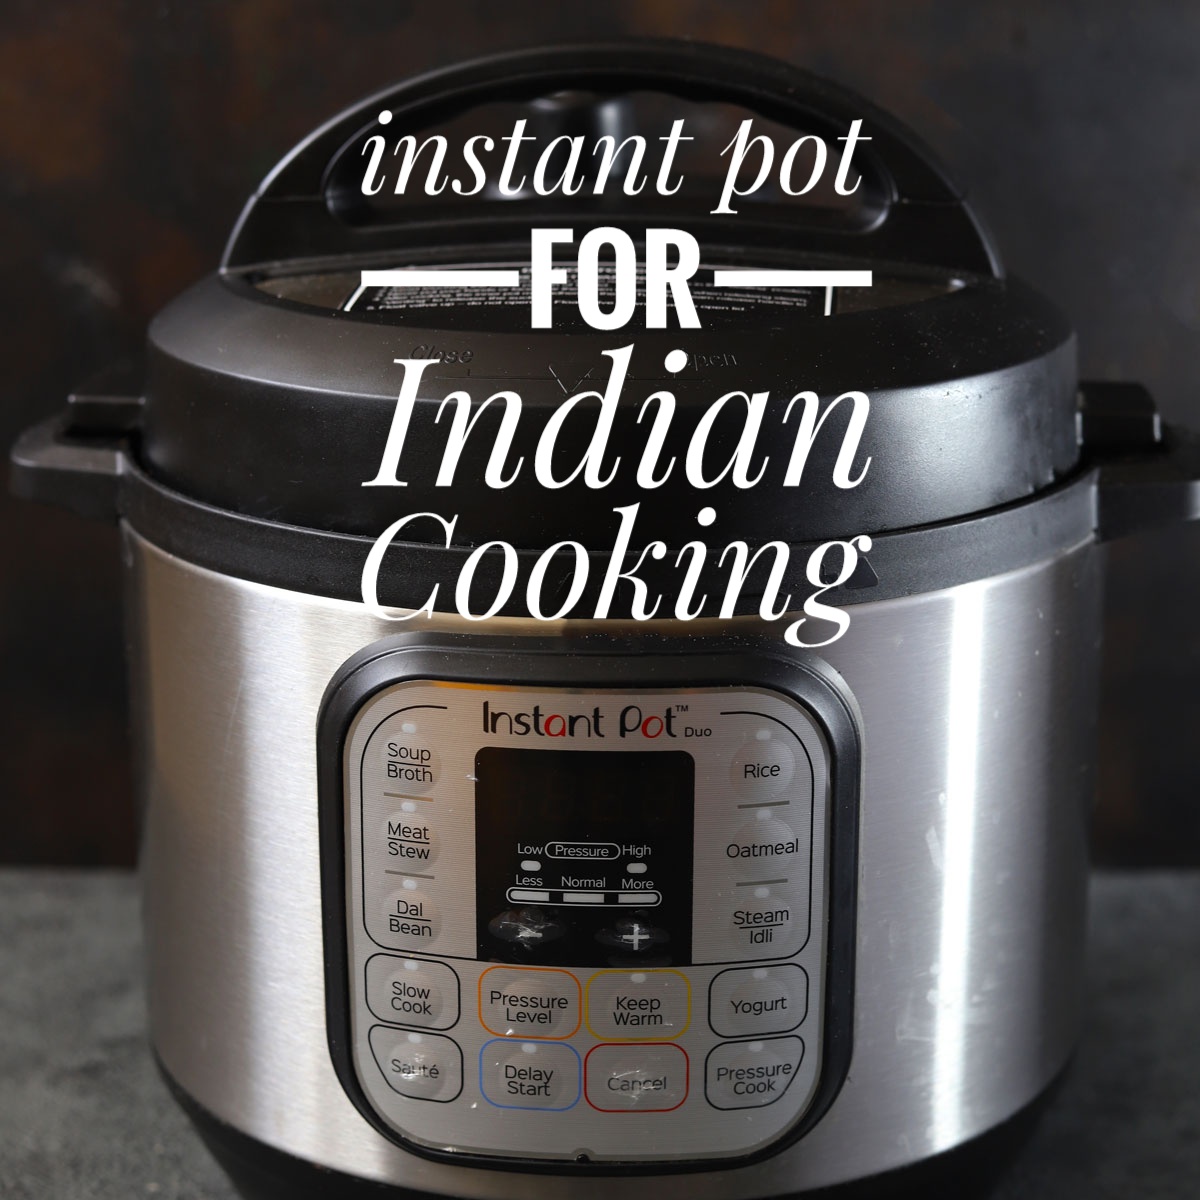 Instant Pot vs Rice Cooker: Which is Better? - A Pressure Cooker Kitchen